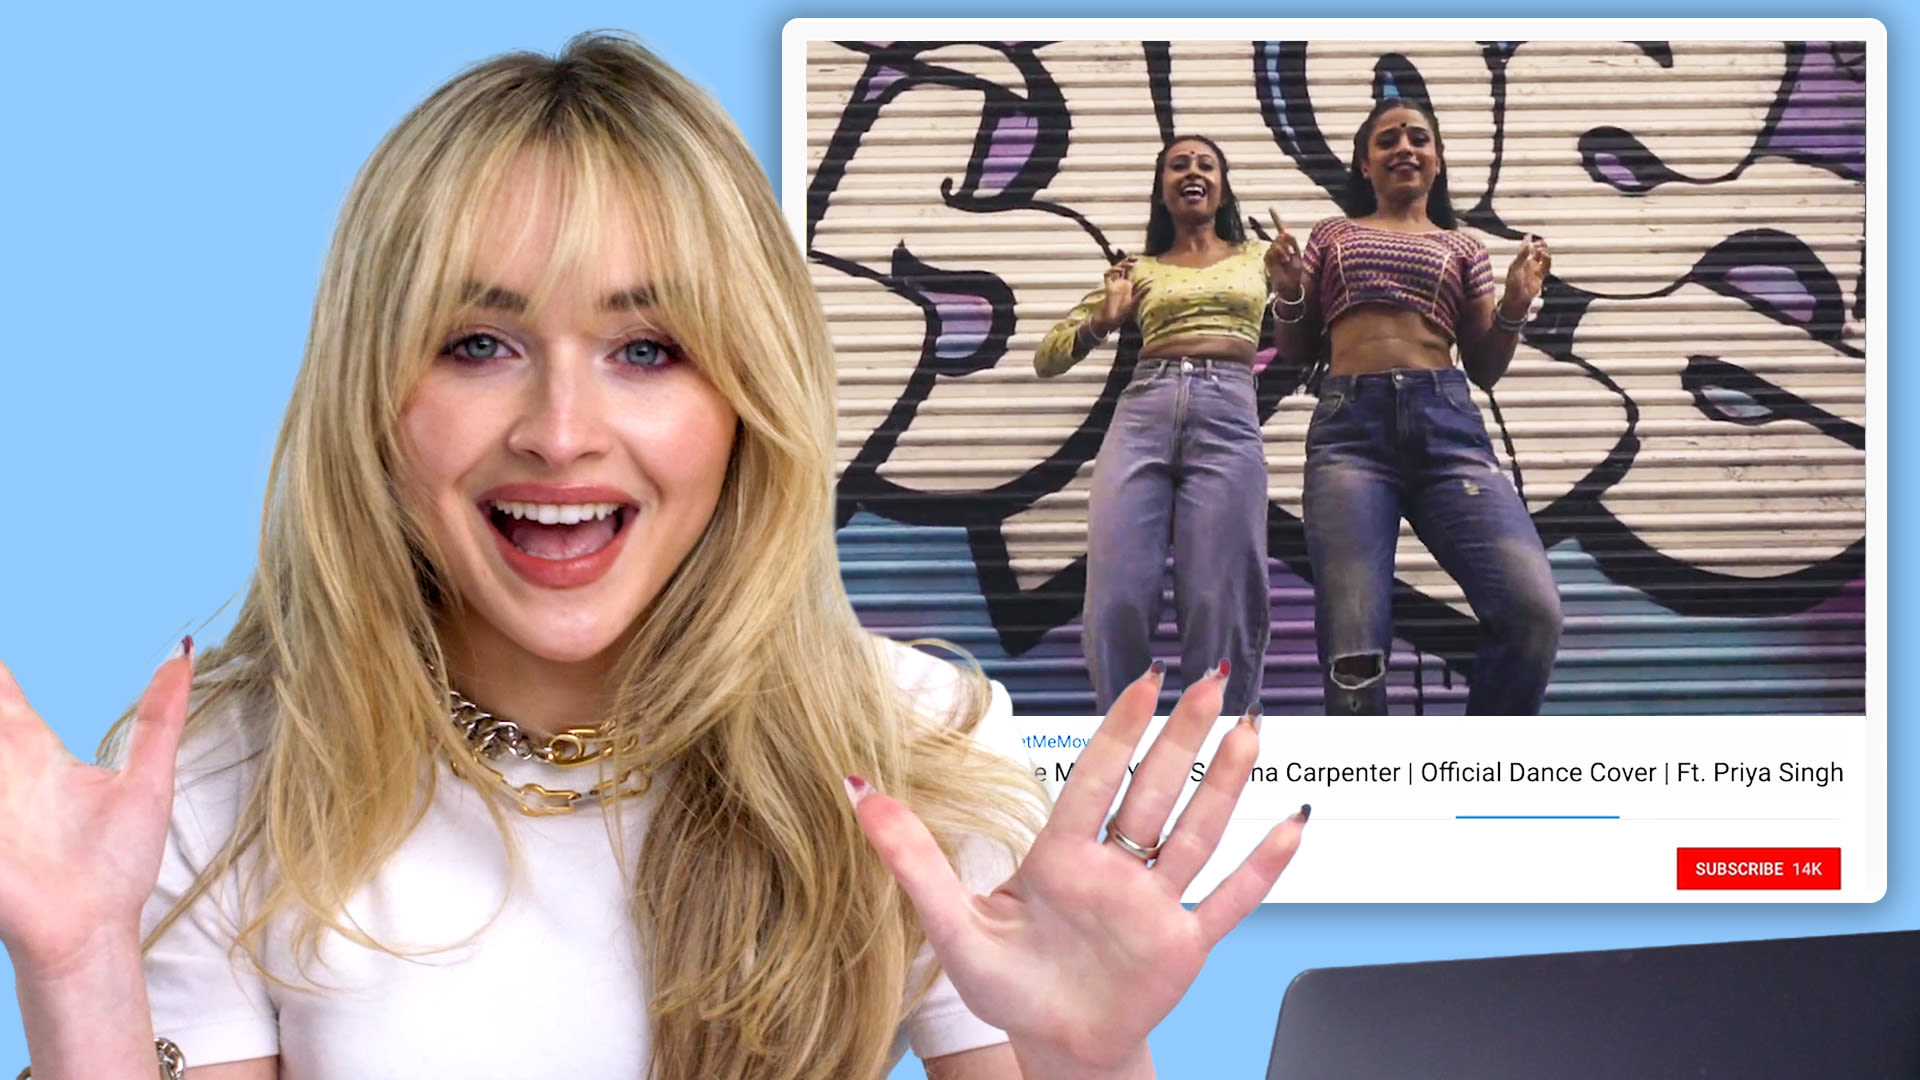 Sabrina Carpenter Shares Music Video For New Single 'Skinny Dipping